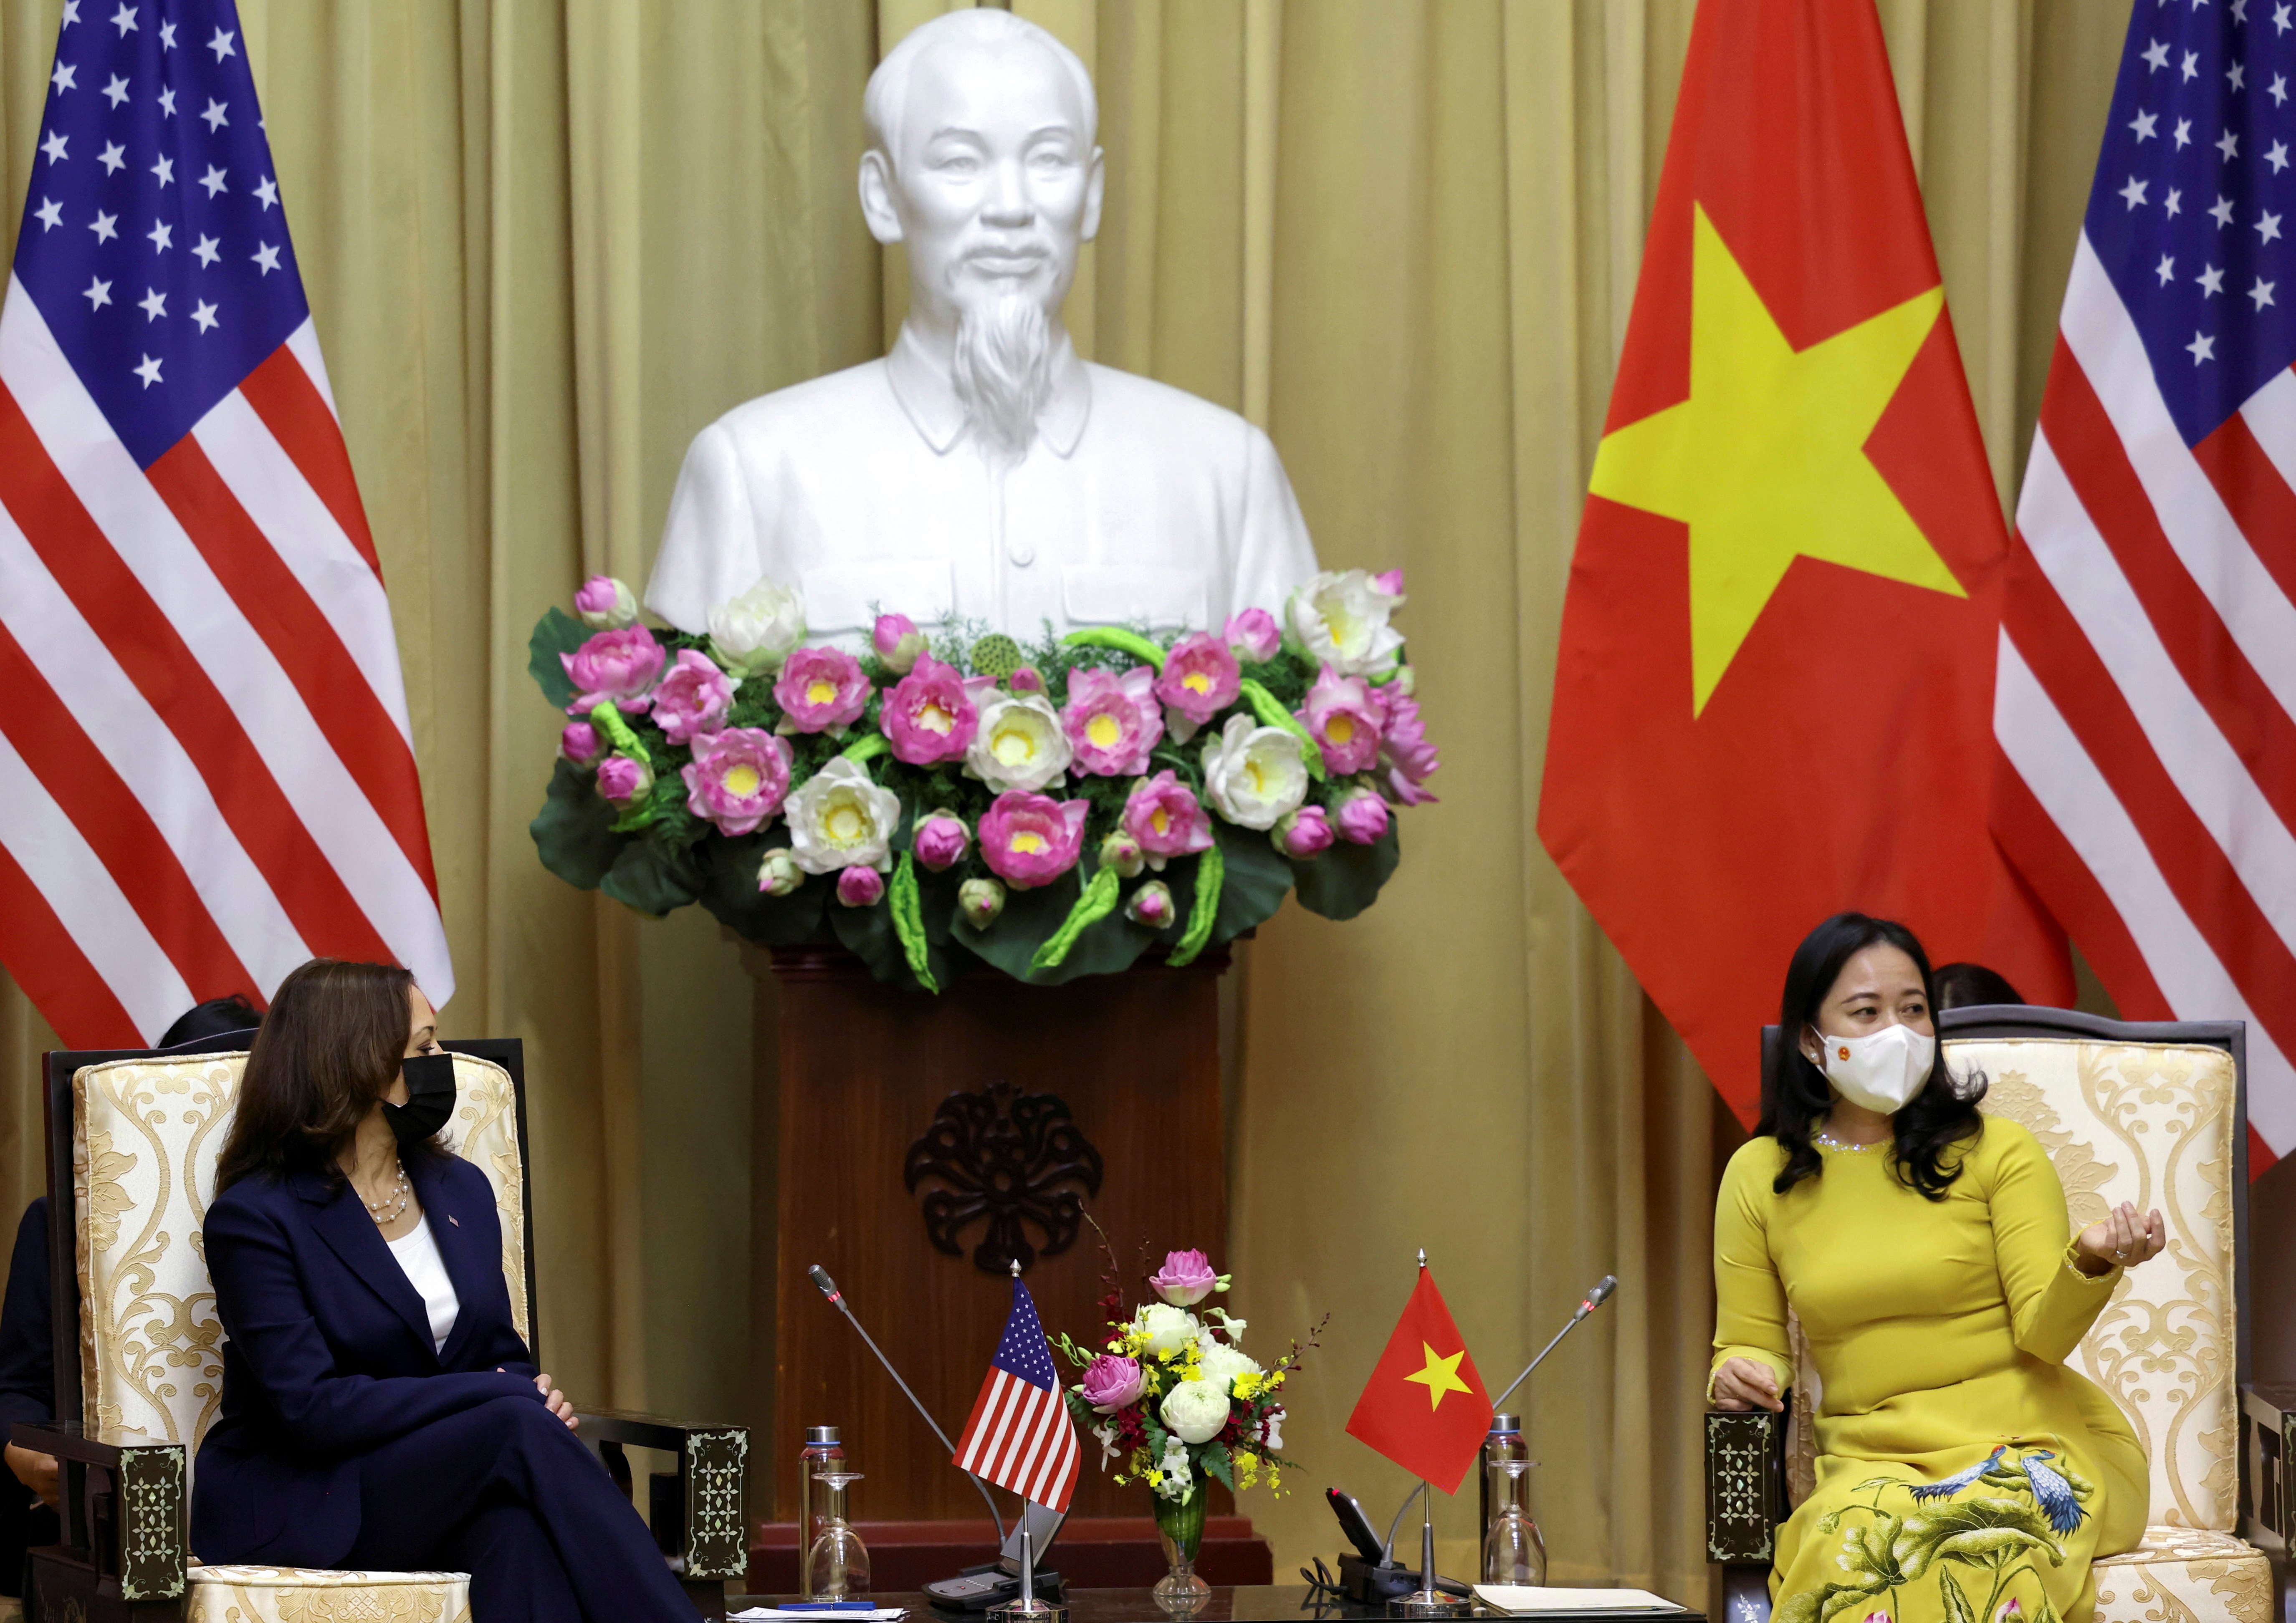 U.S. Vice President Kamala Harris speaks with Vietnam's Vice President Vo Thi Anh Xuan in the Gold Room of the Presidential Palace, in Hanoi, Vietnam, August, 25, 2021. REUTERS/Evelyn Hockstein/Pool    REFILE - QUALITY REPEAT